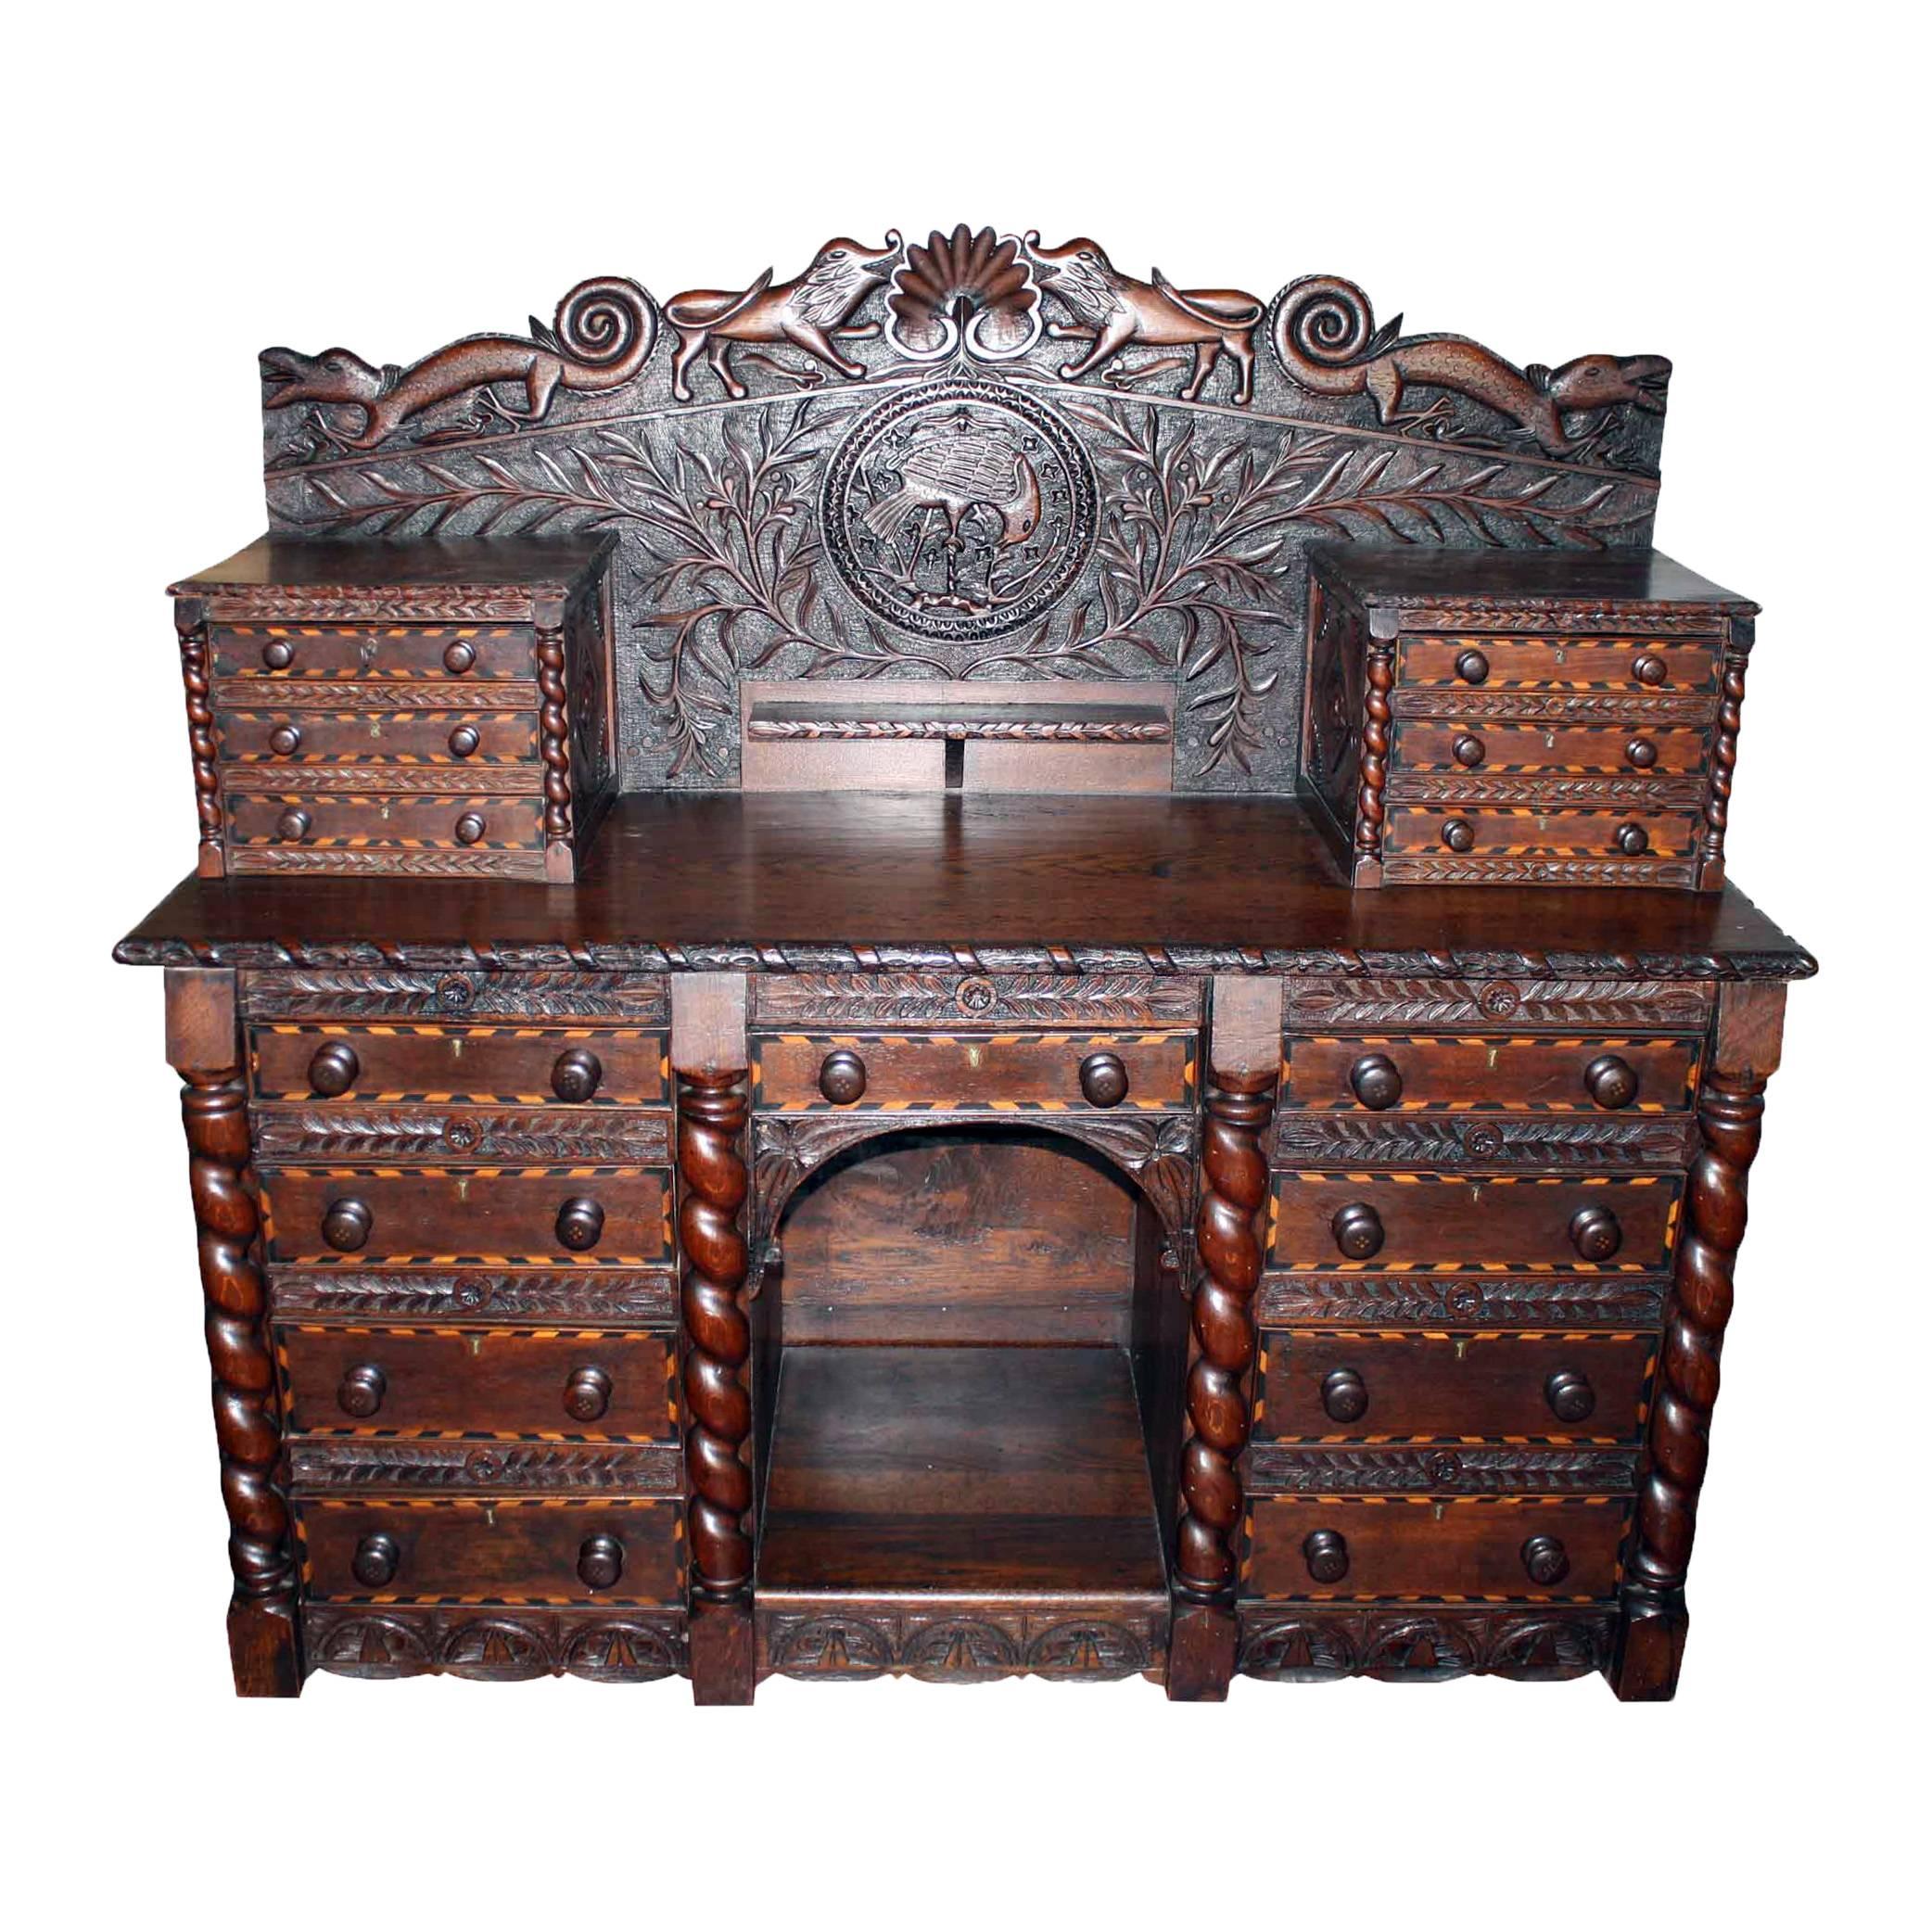 German Carved and Inlaid Server or Sideboard, circa 1850 For Sale